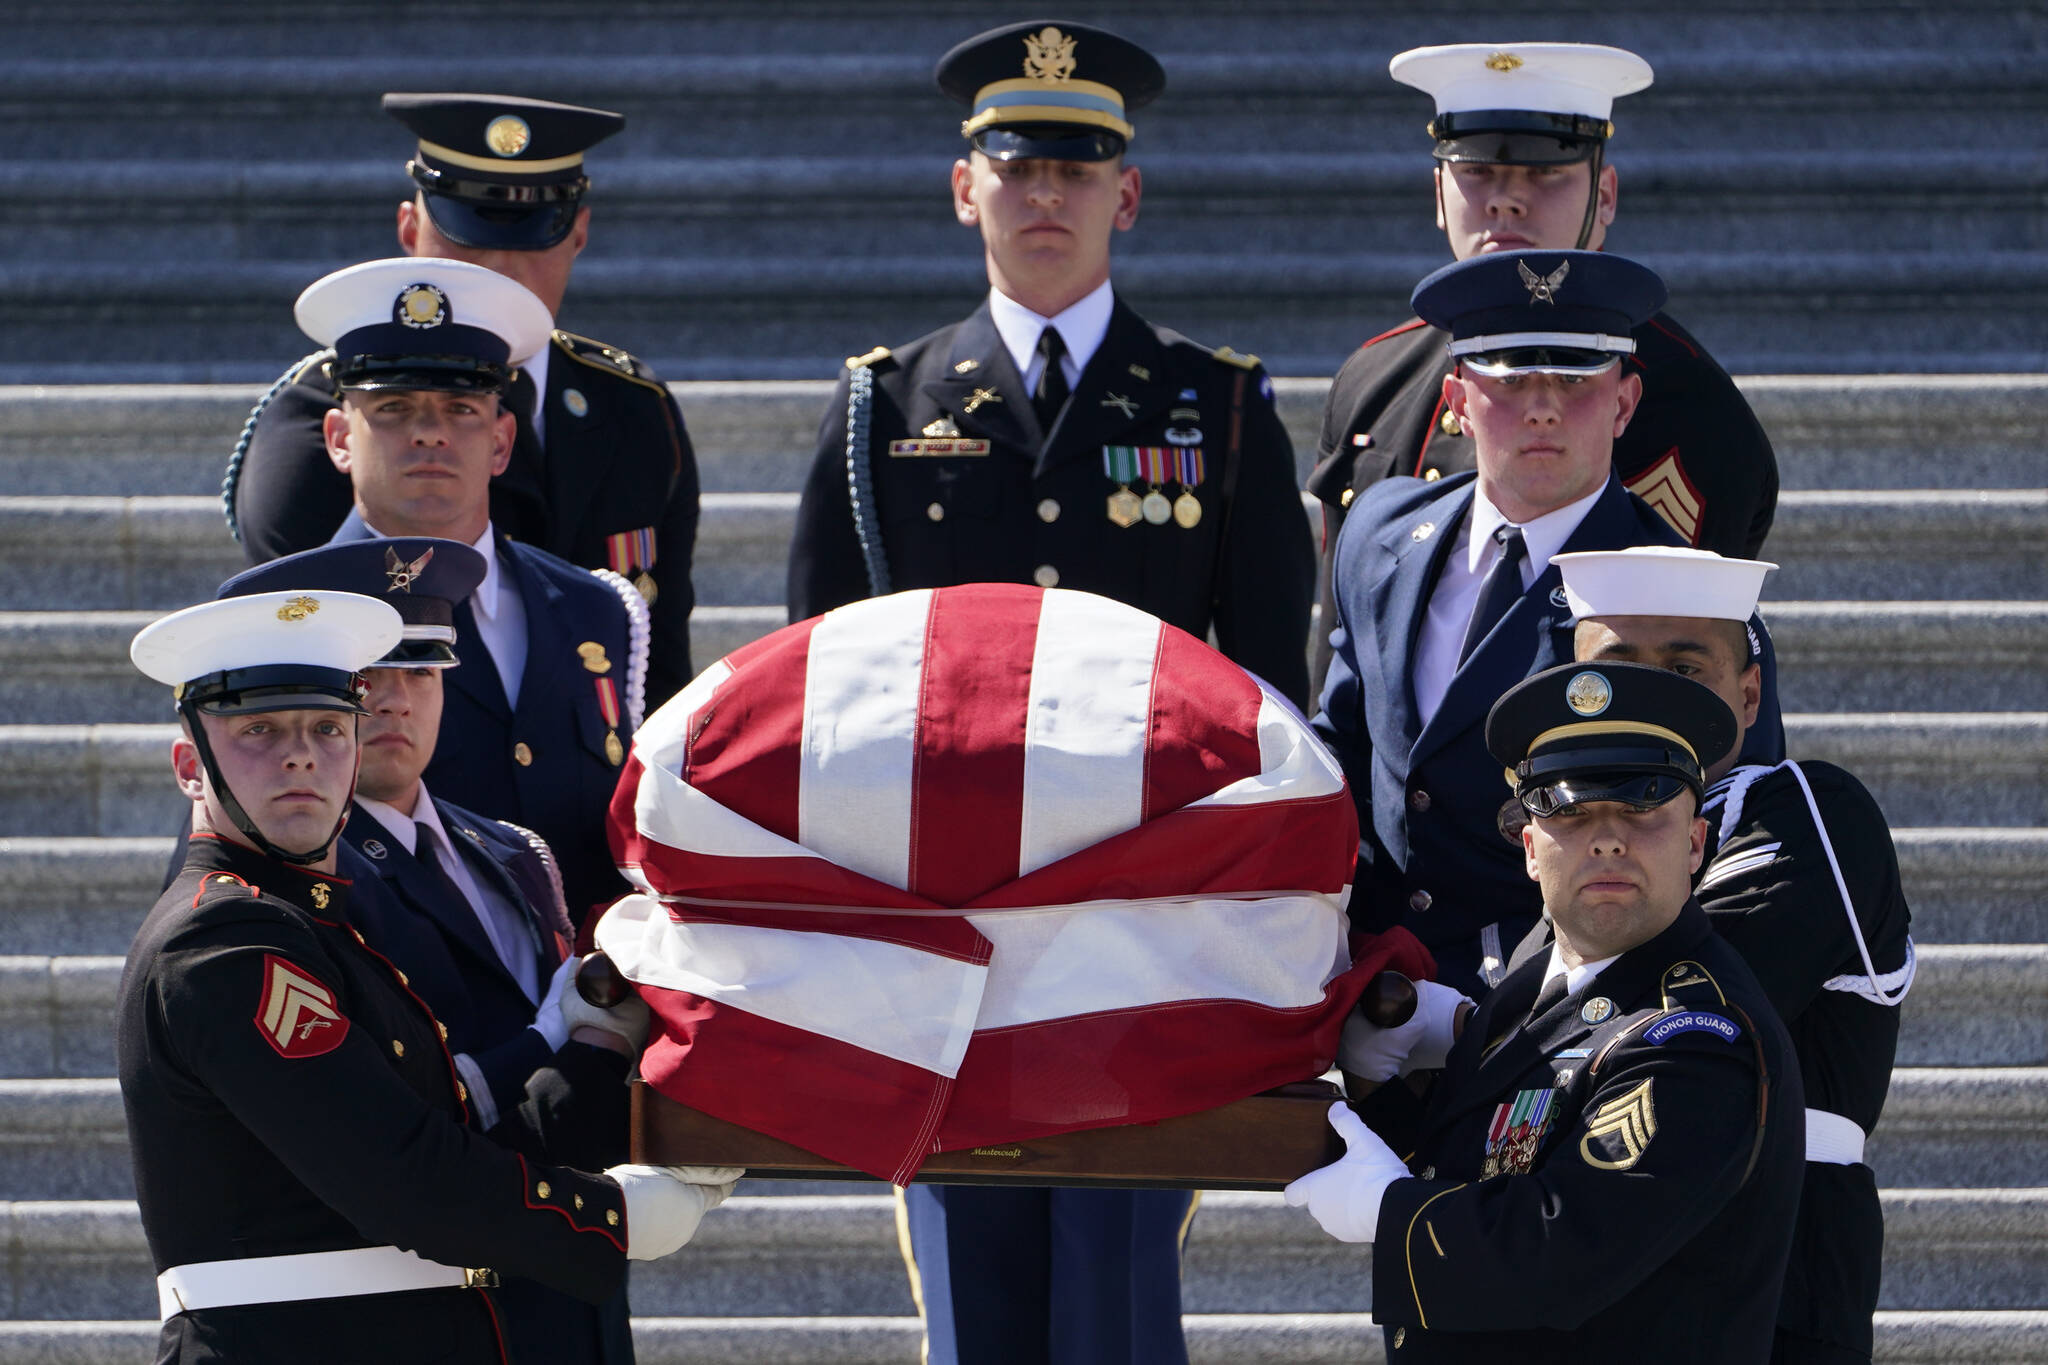 A joint forces honor guard carries the casket of Rep. Don Young, R-Alaska, down the steps of the House of Representatives on Capitol Hill in Washington, Tuesday, March 29, 2022. Young, the longest-serving member of Alaska’s congressional delegation, died Friday, March 18, 2022. He was 88. (AP Photo / Susan Walsh)